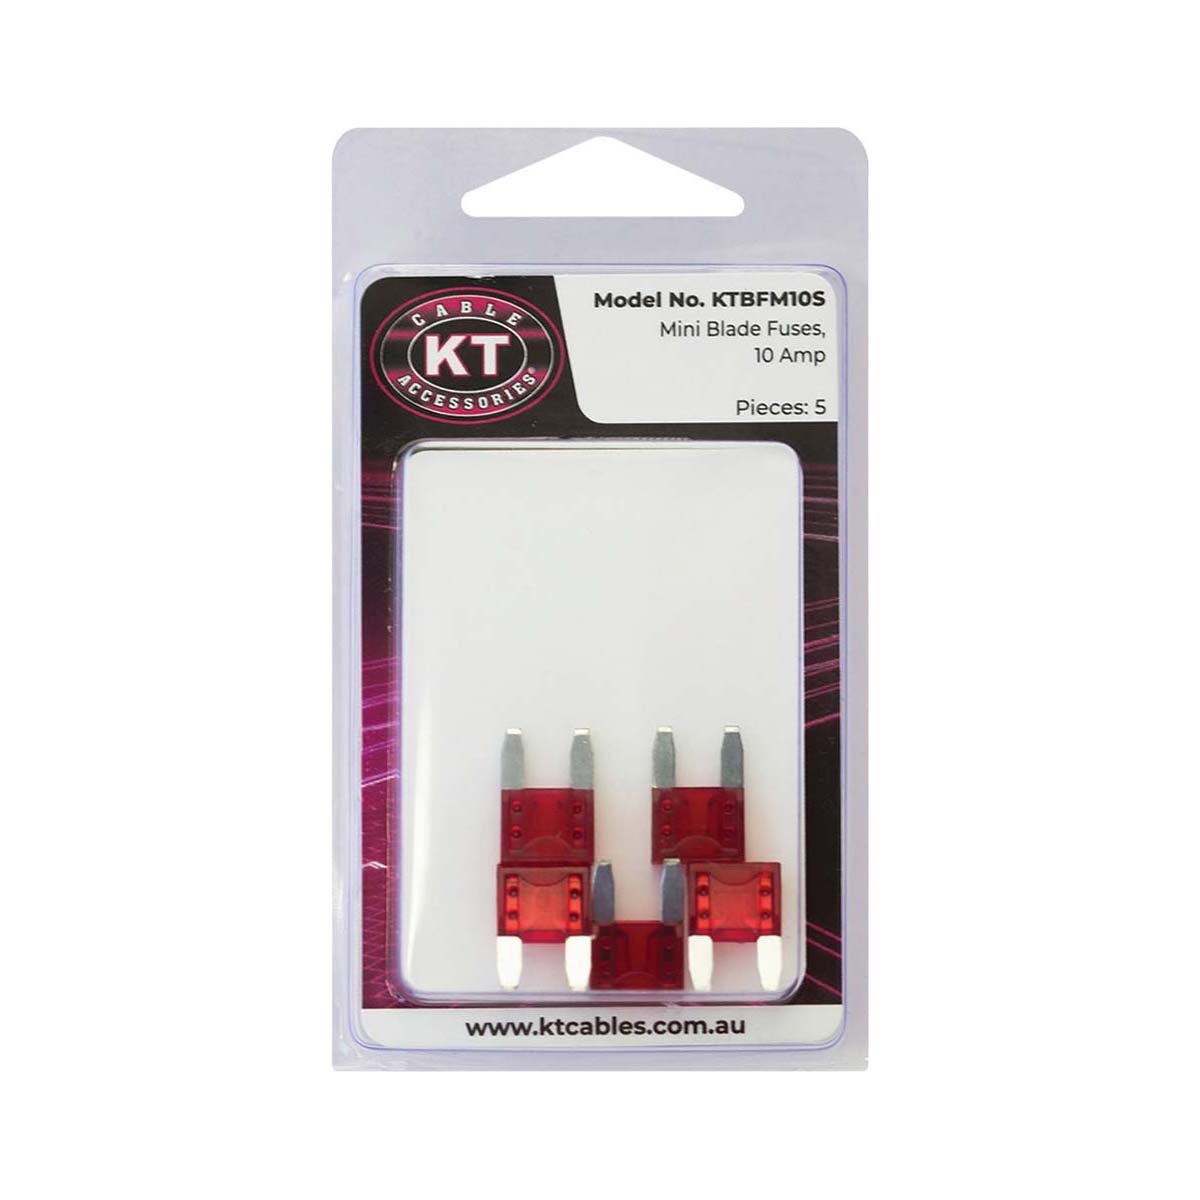 KT Cables Mini Blade Fuse 5 Pack 15amp